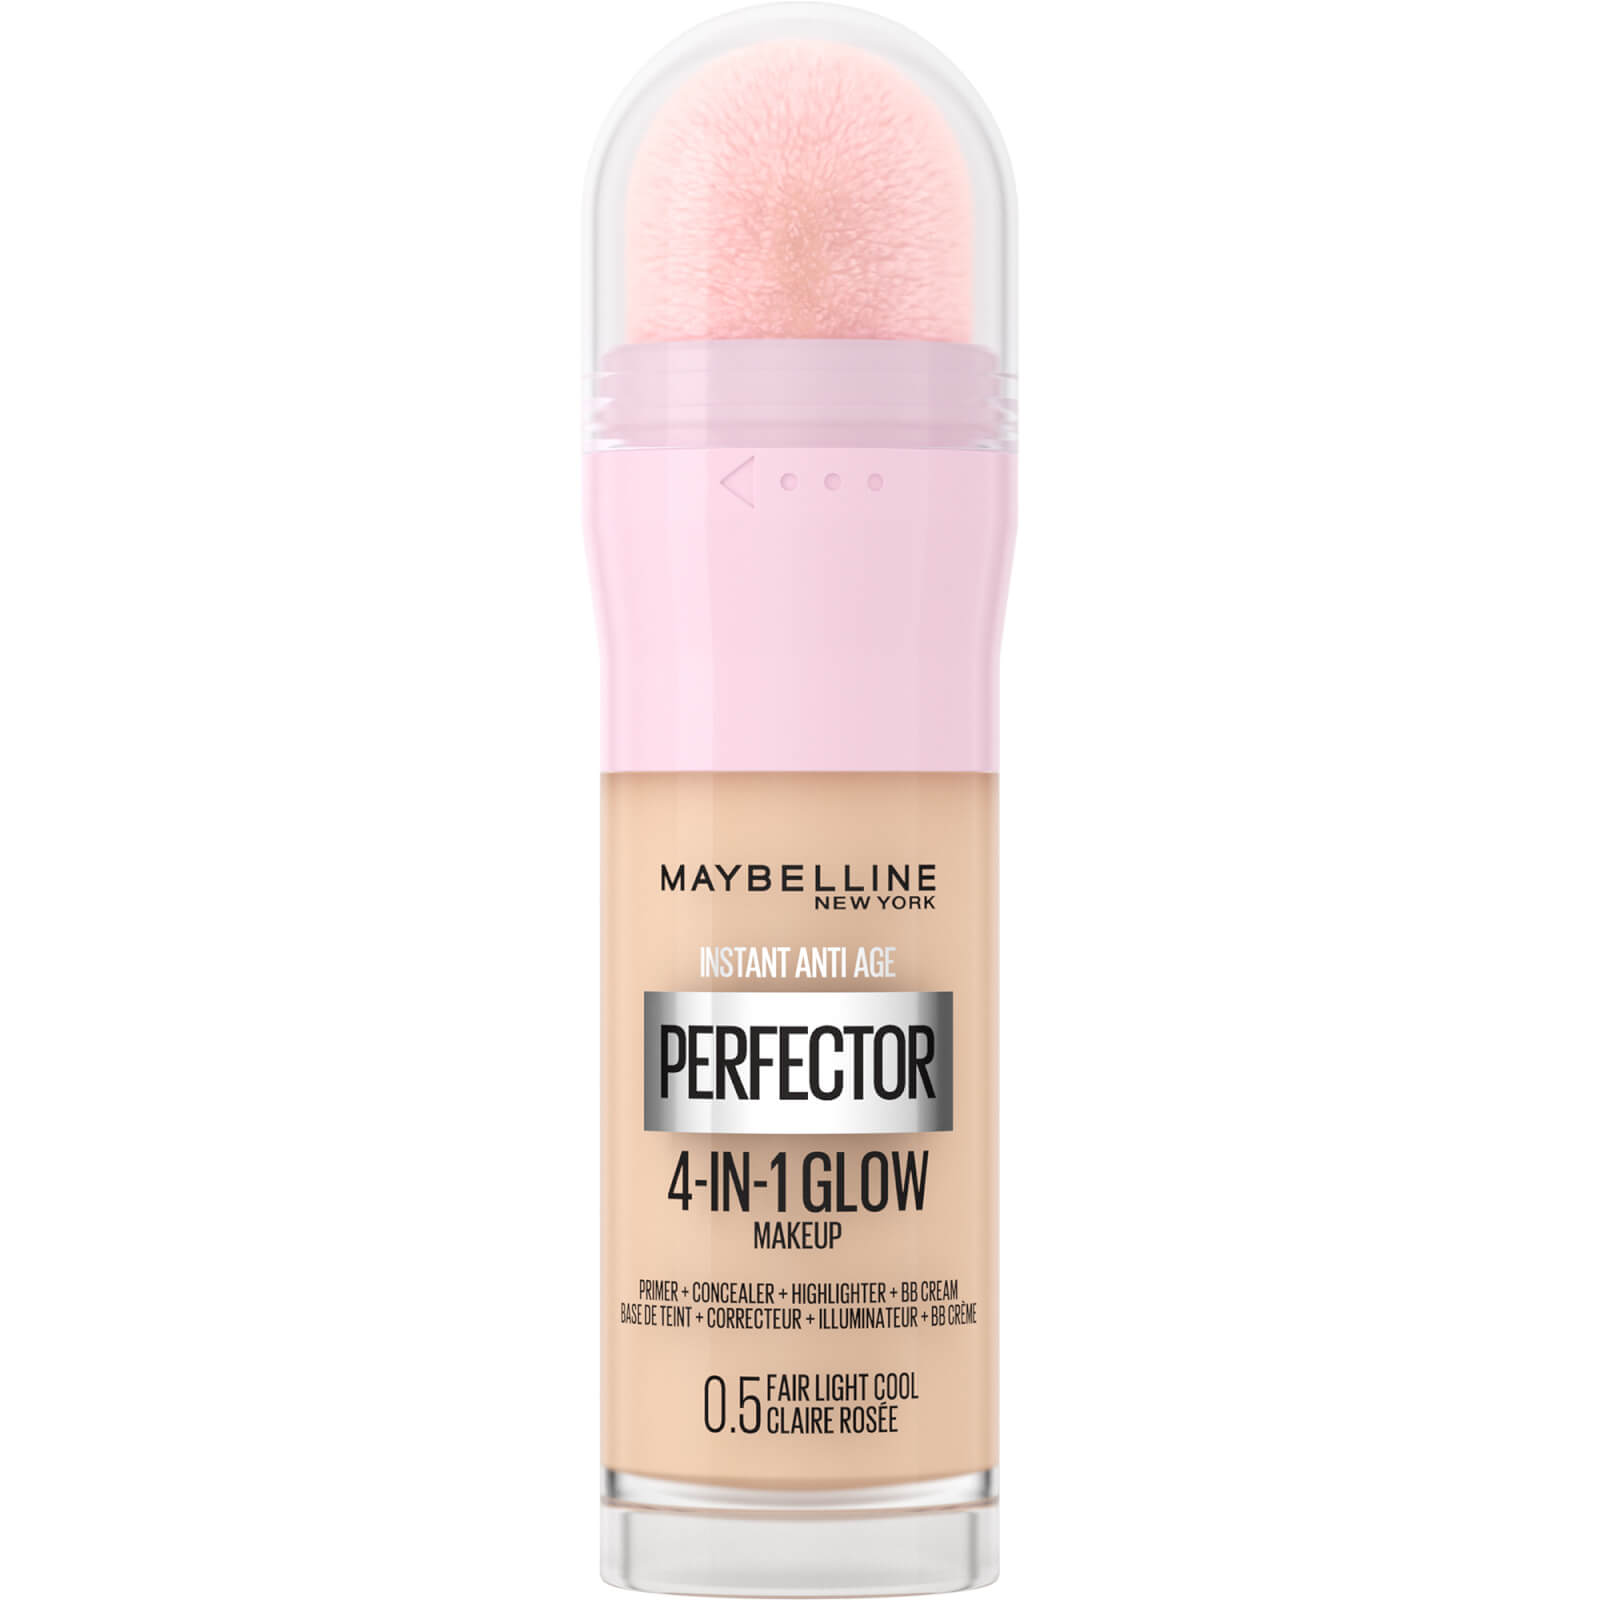 maybelline instant anti age perfector 4-in-1 glow primer, concealer, highlighter, bb cream 20ml (various shades) - fair light cool